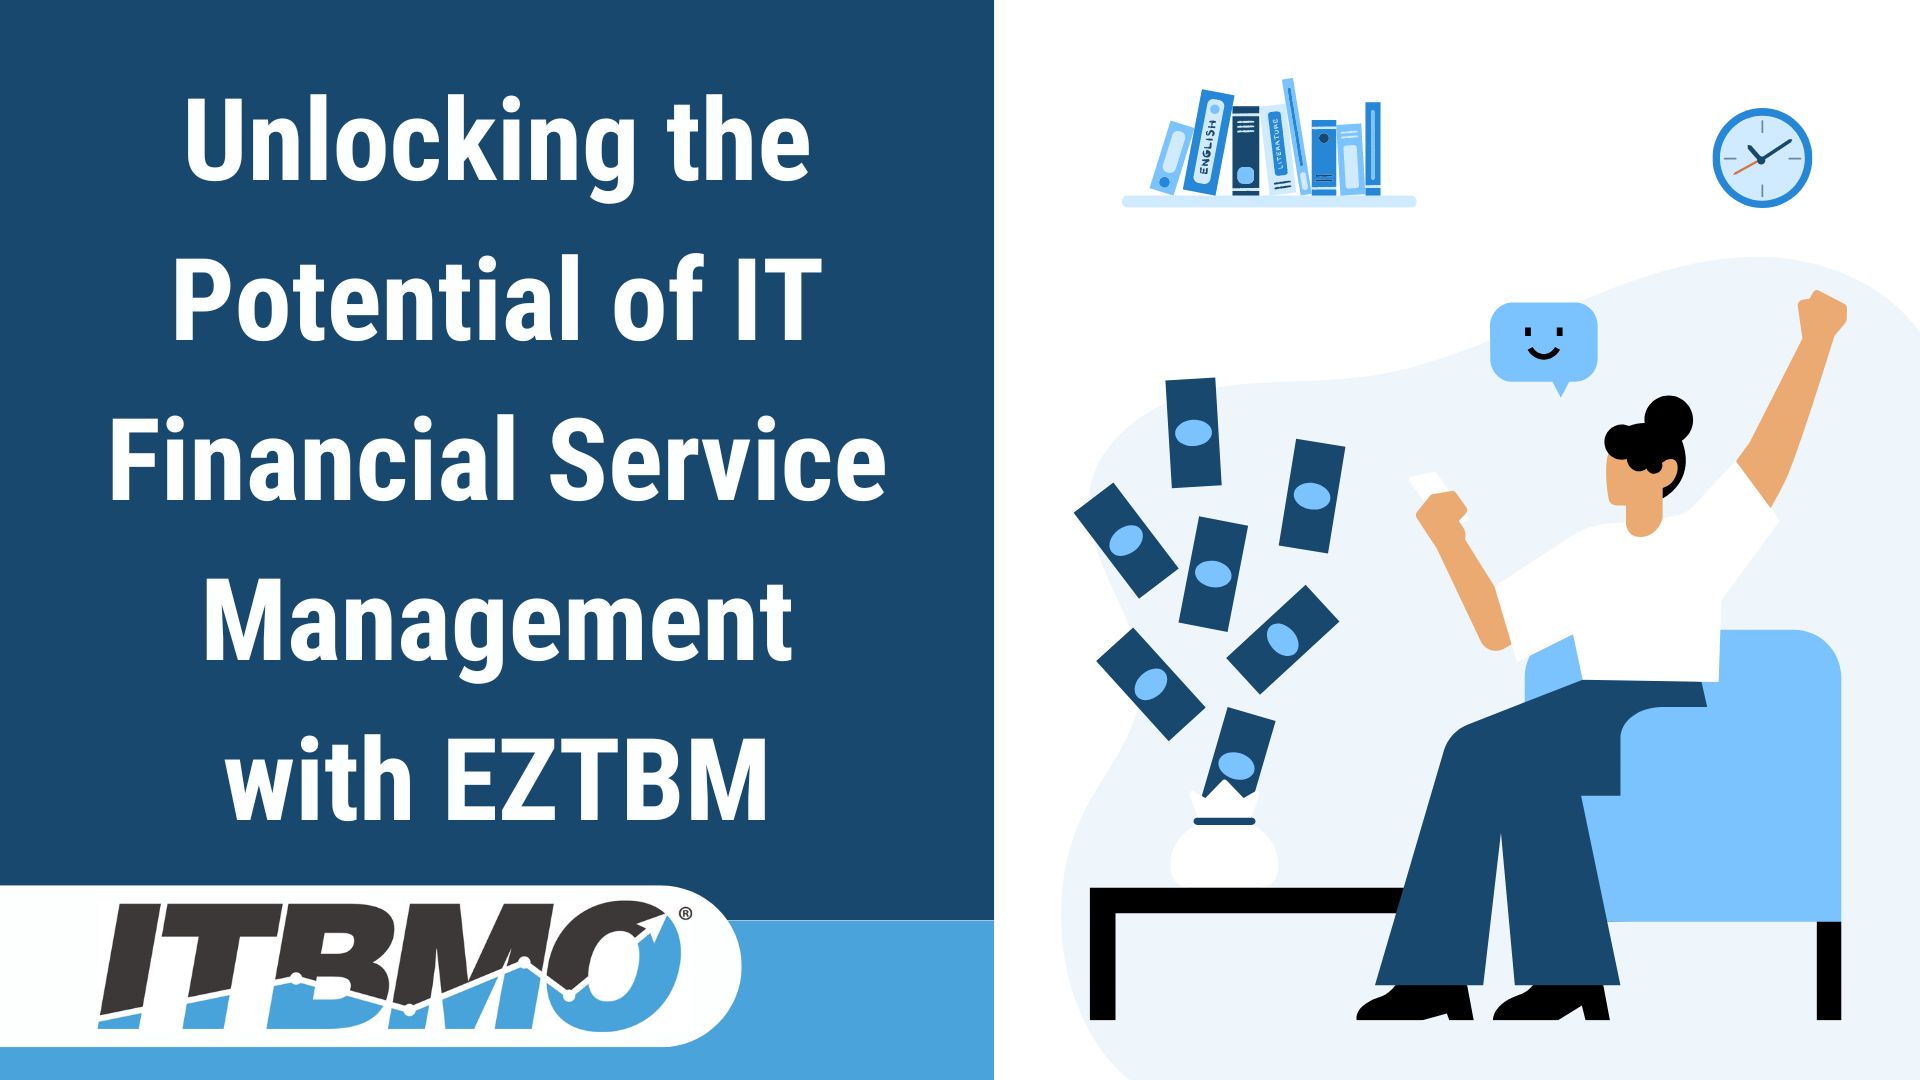 Unlocking the Potential of IT Financial Service Management with EZTBM